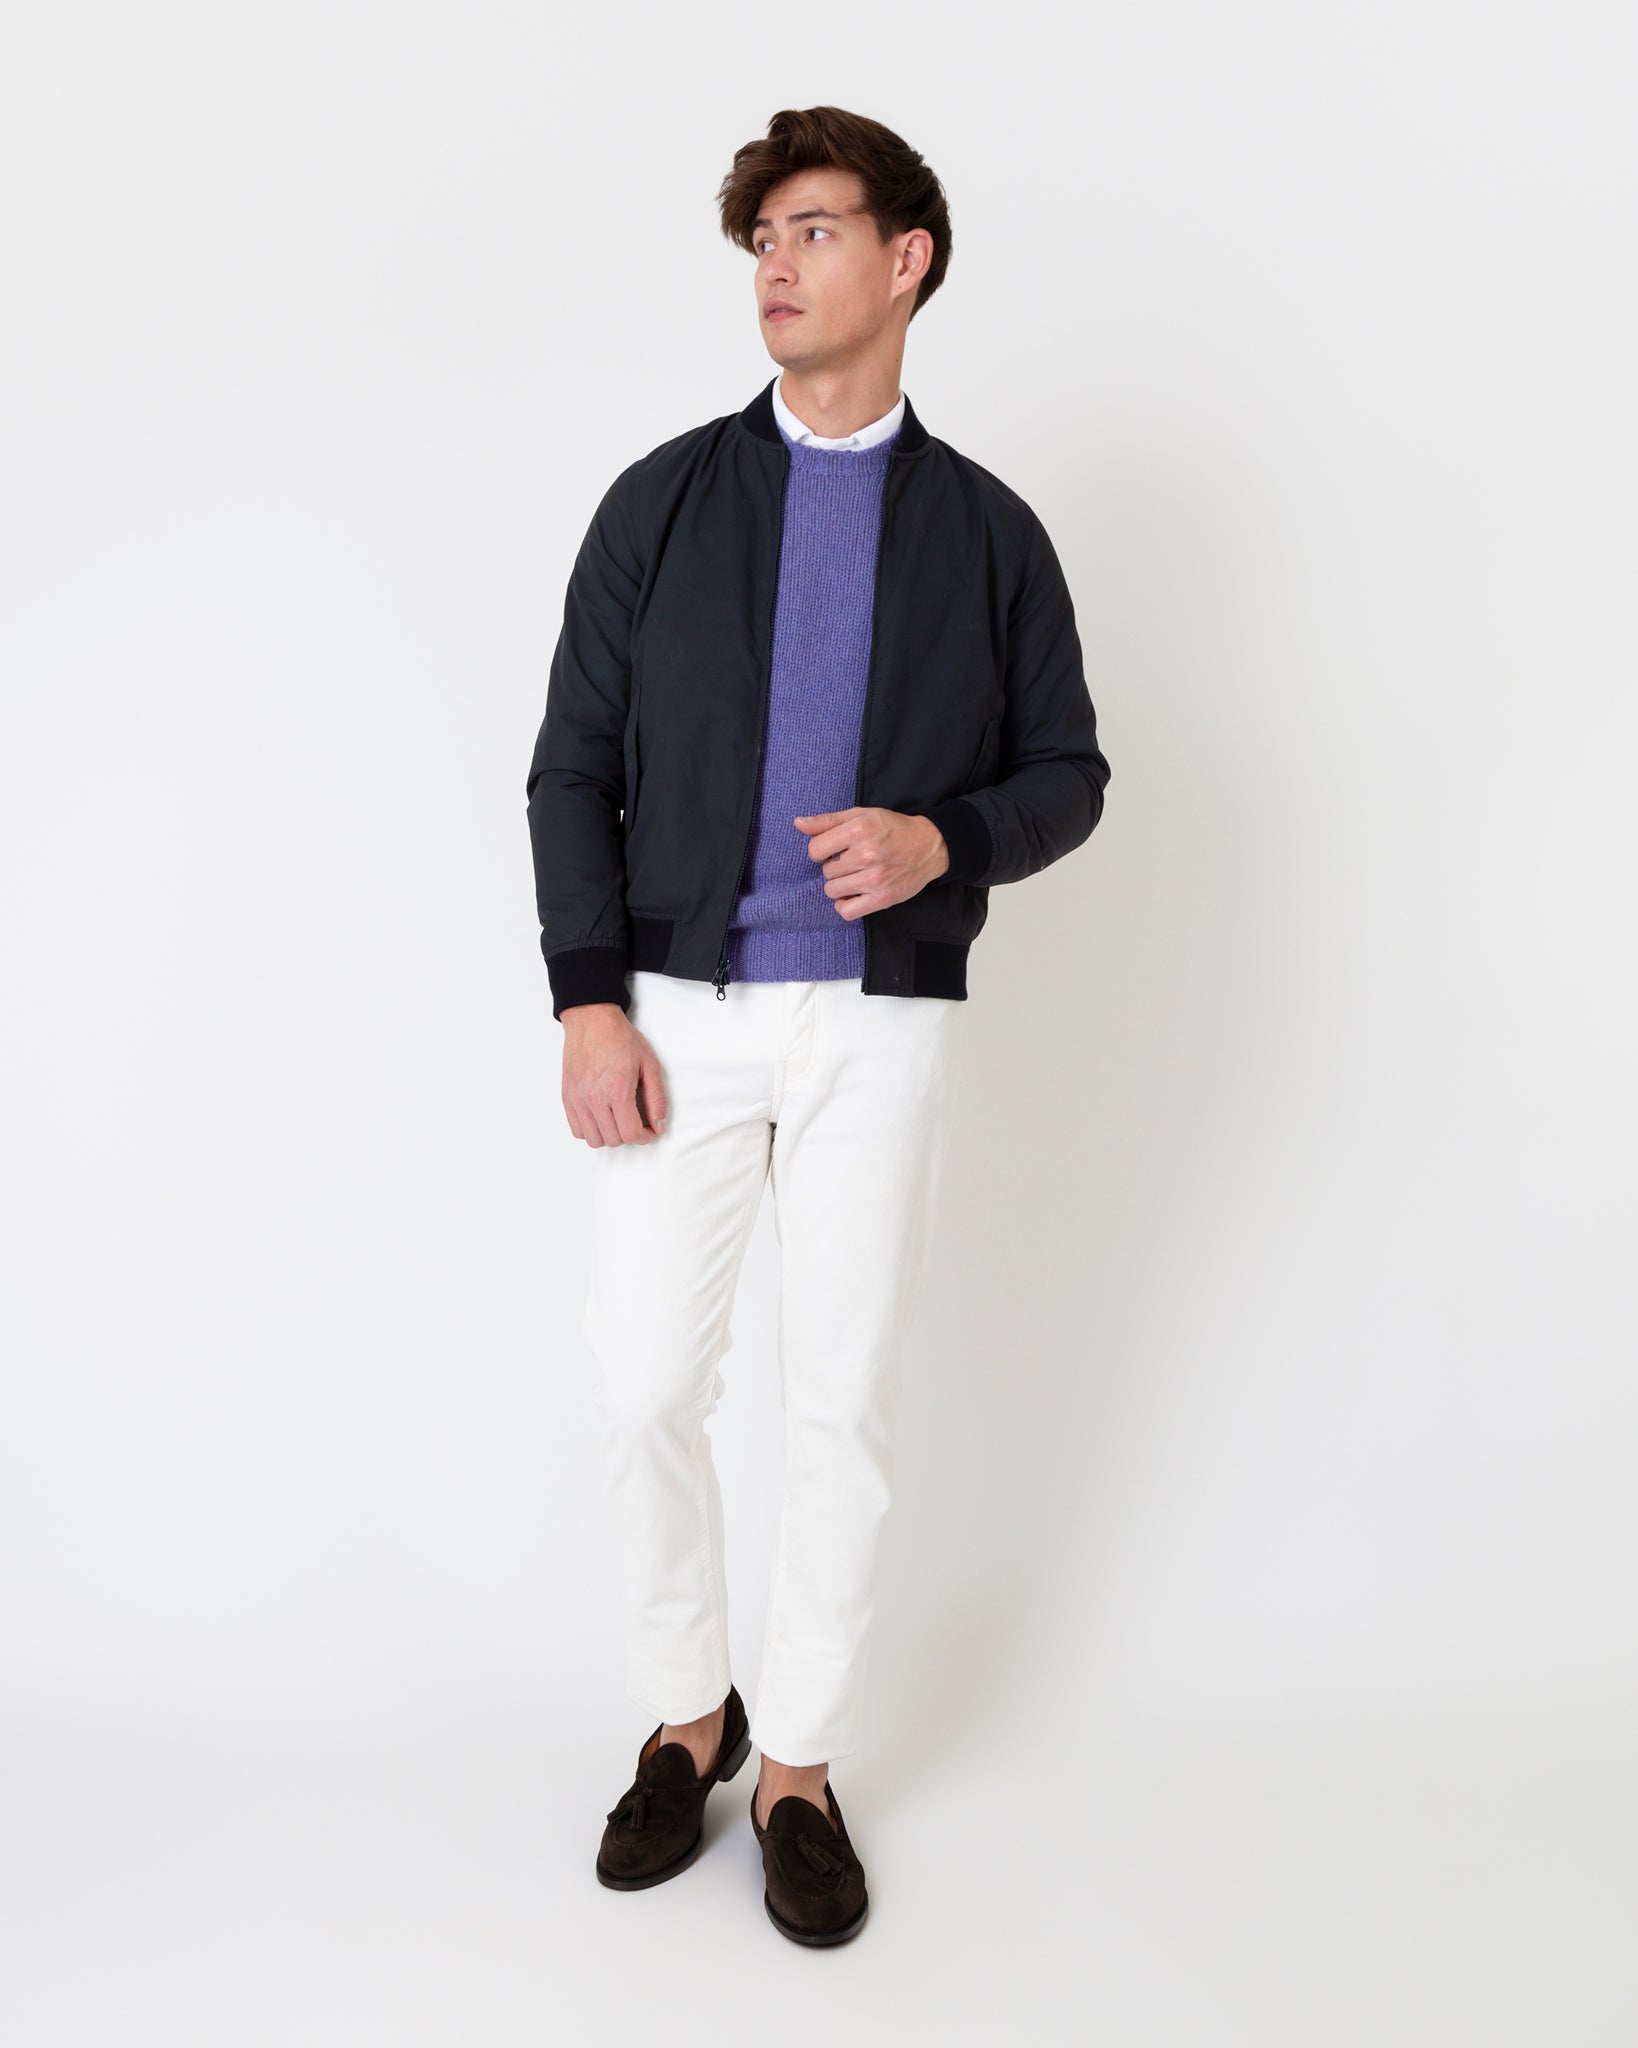 Bomber Jacket in Navy Dry Waxed Cotton